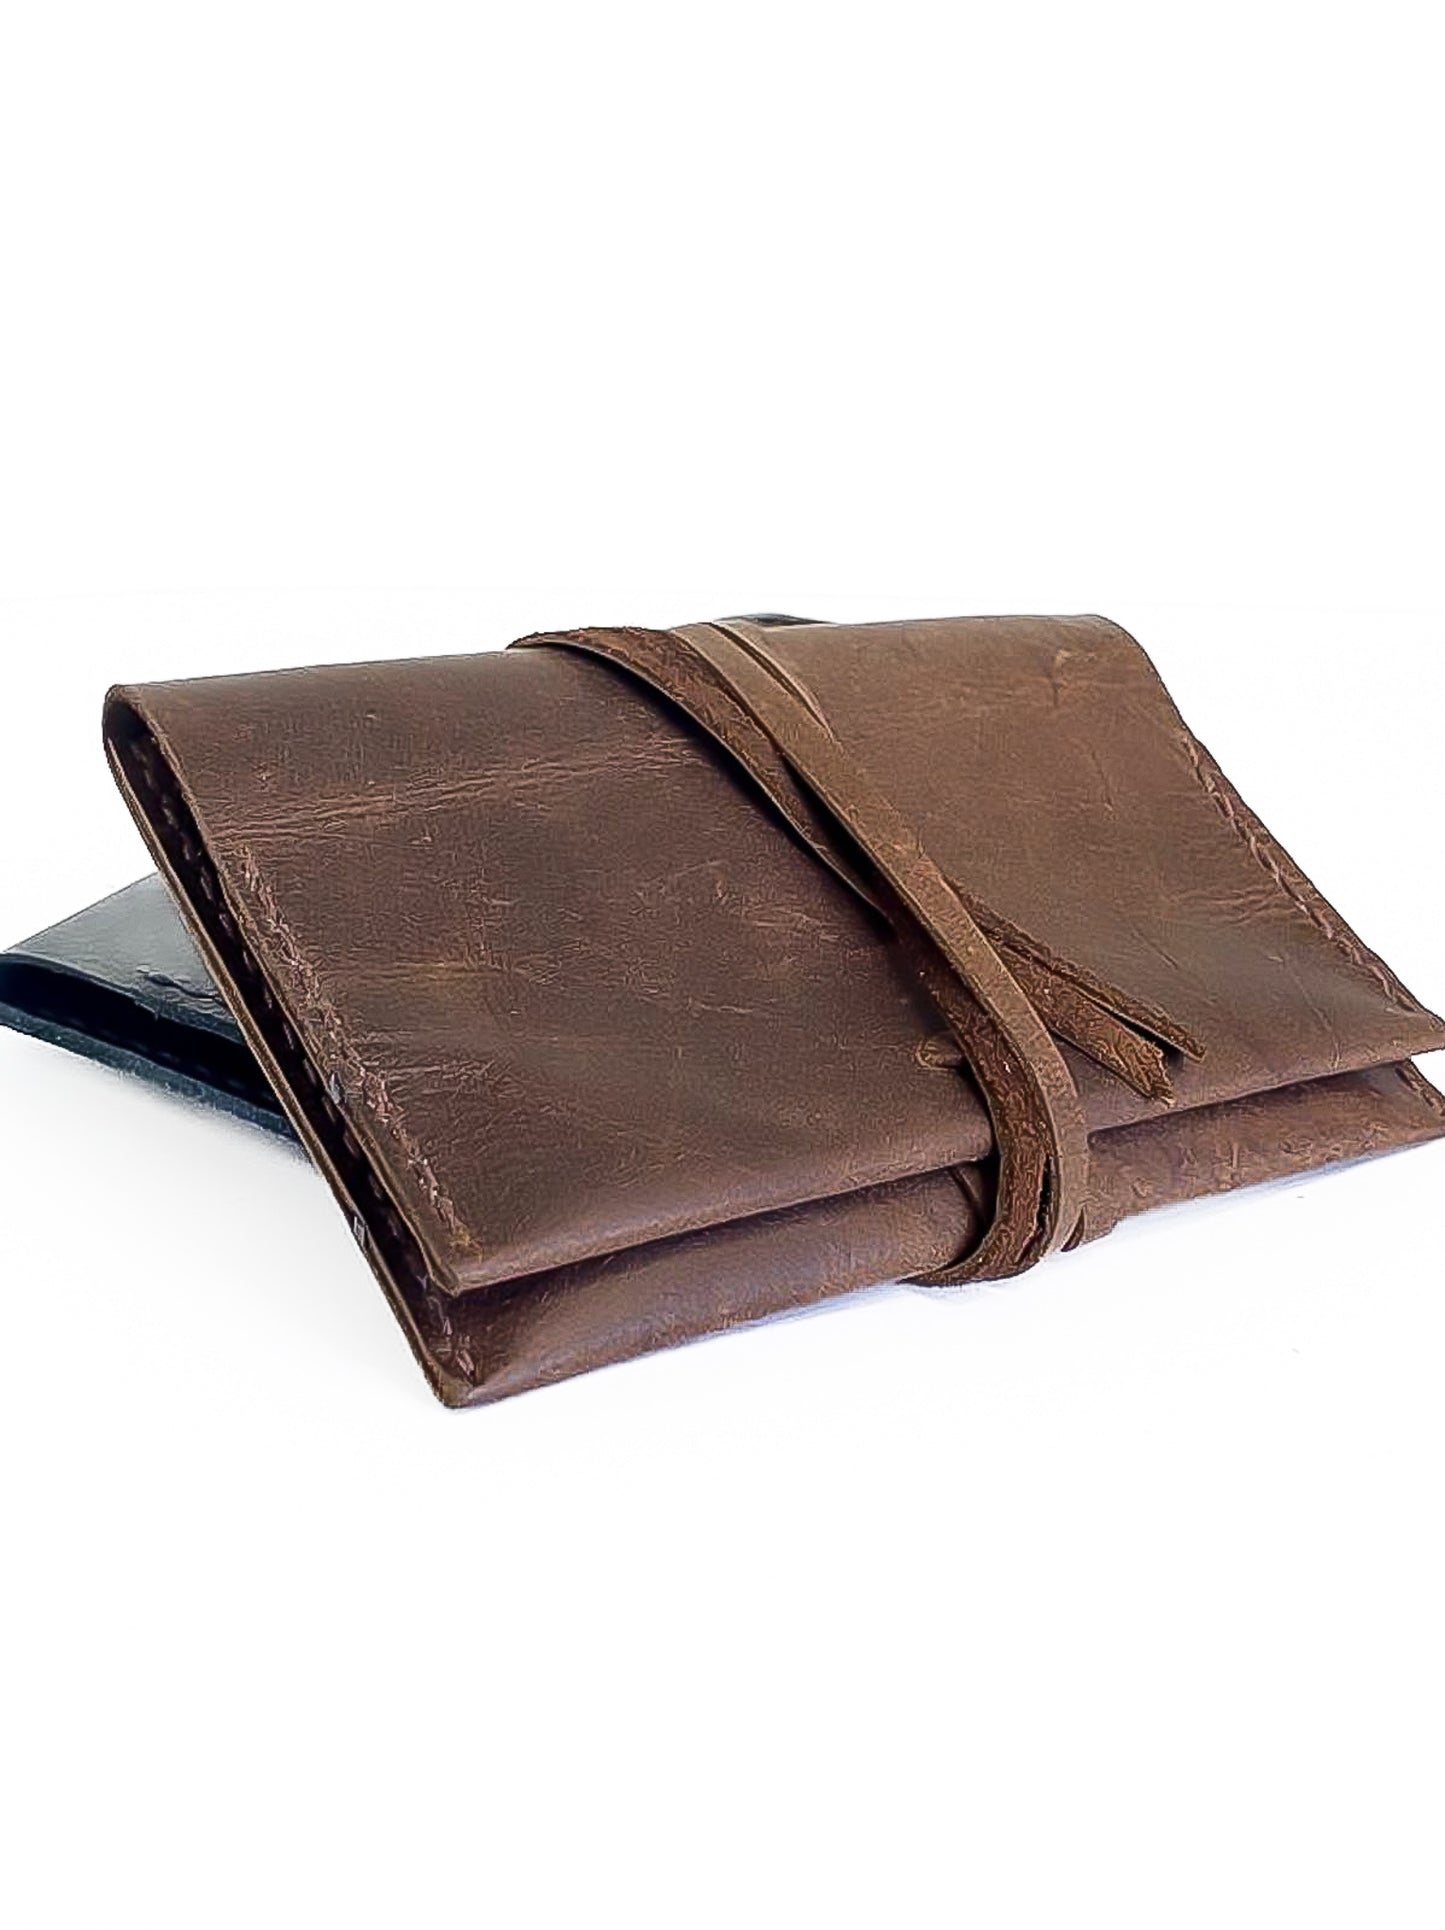 Sanna Leather Rollie Tobacco Pouch